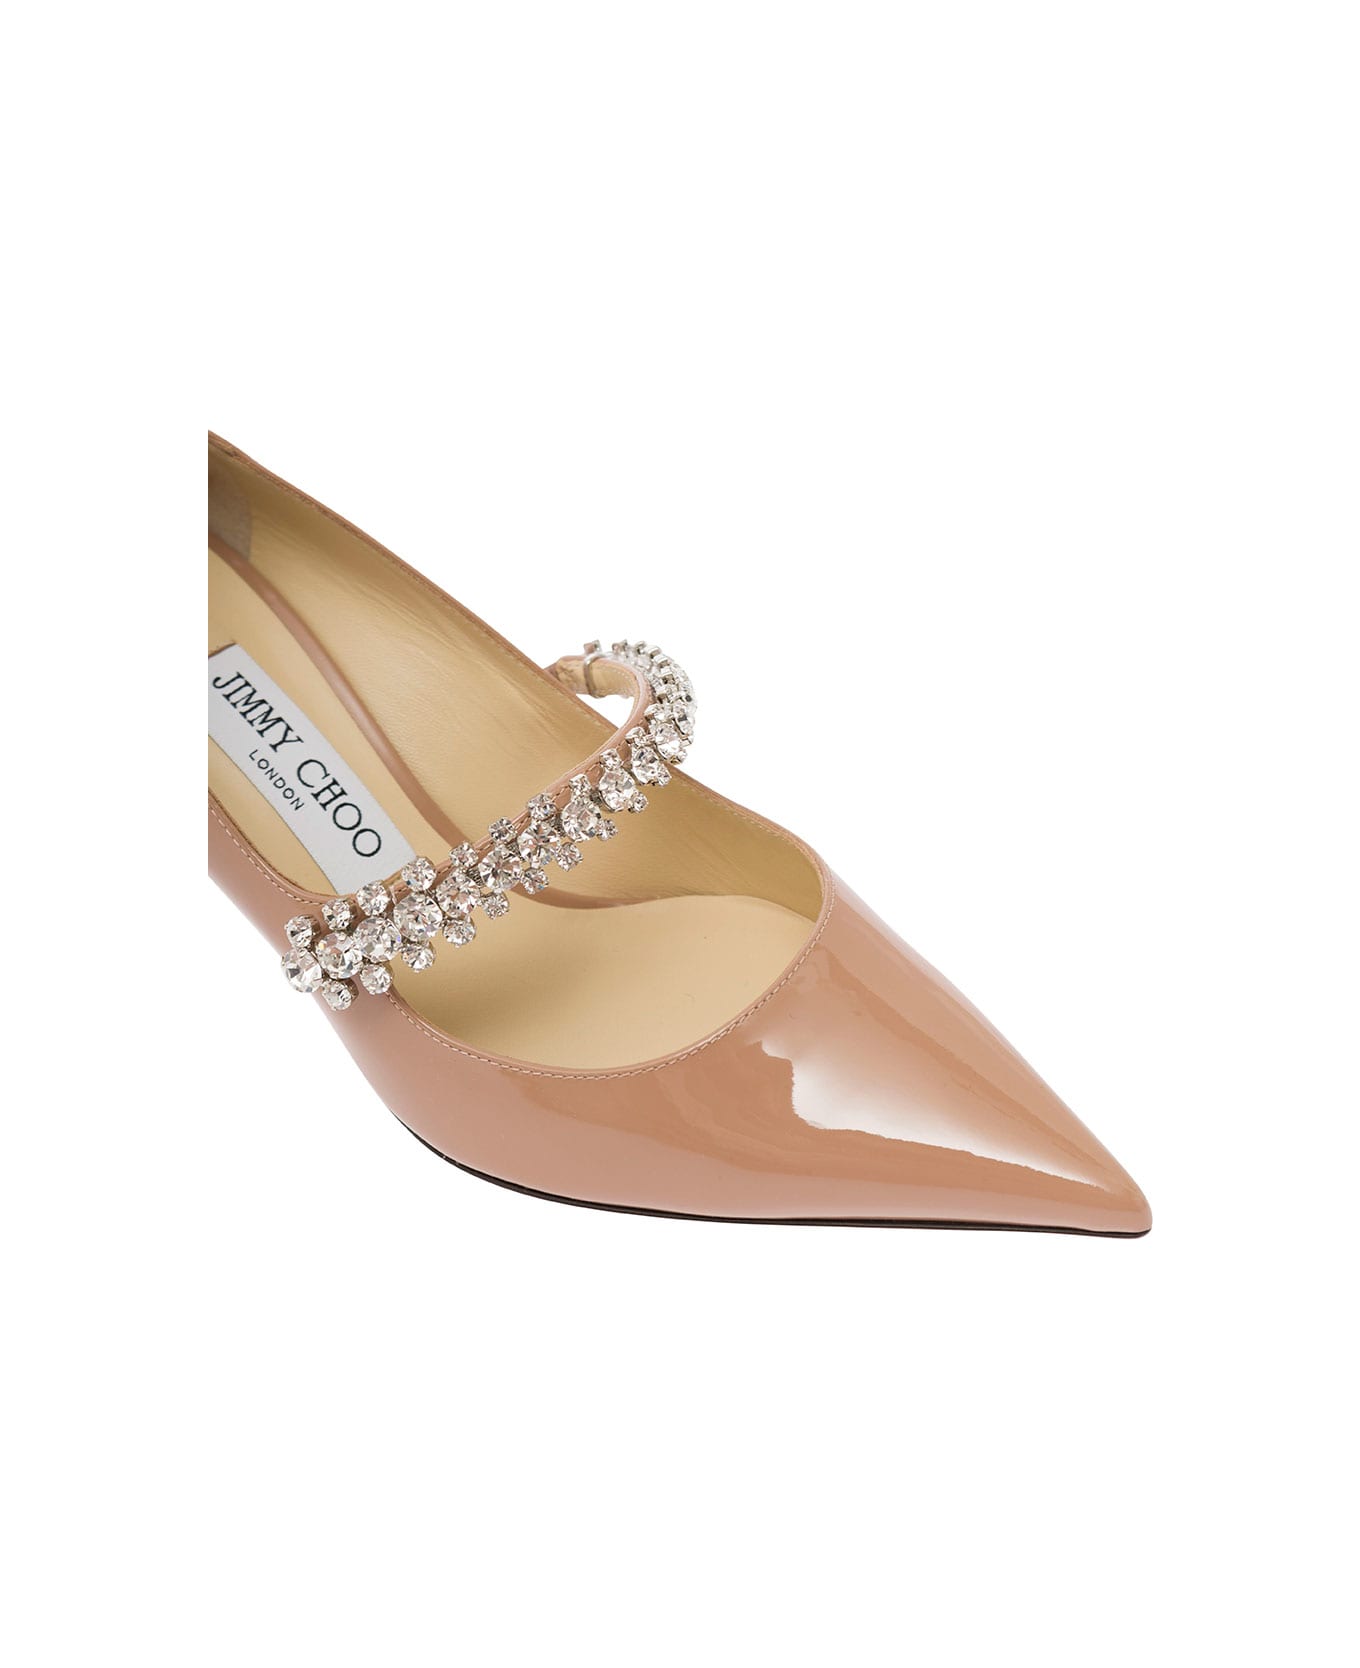 Jimmy Choo 'bing' Pink Pumps With Crystal Embellishment In Patent Leather Woman - Pink